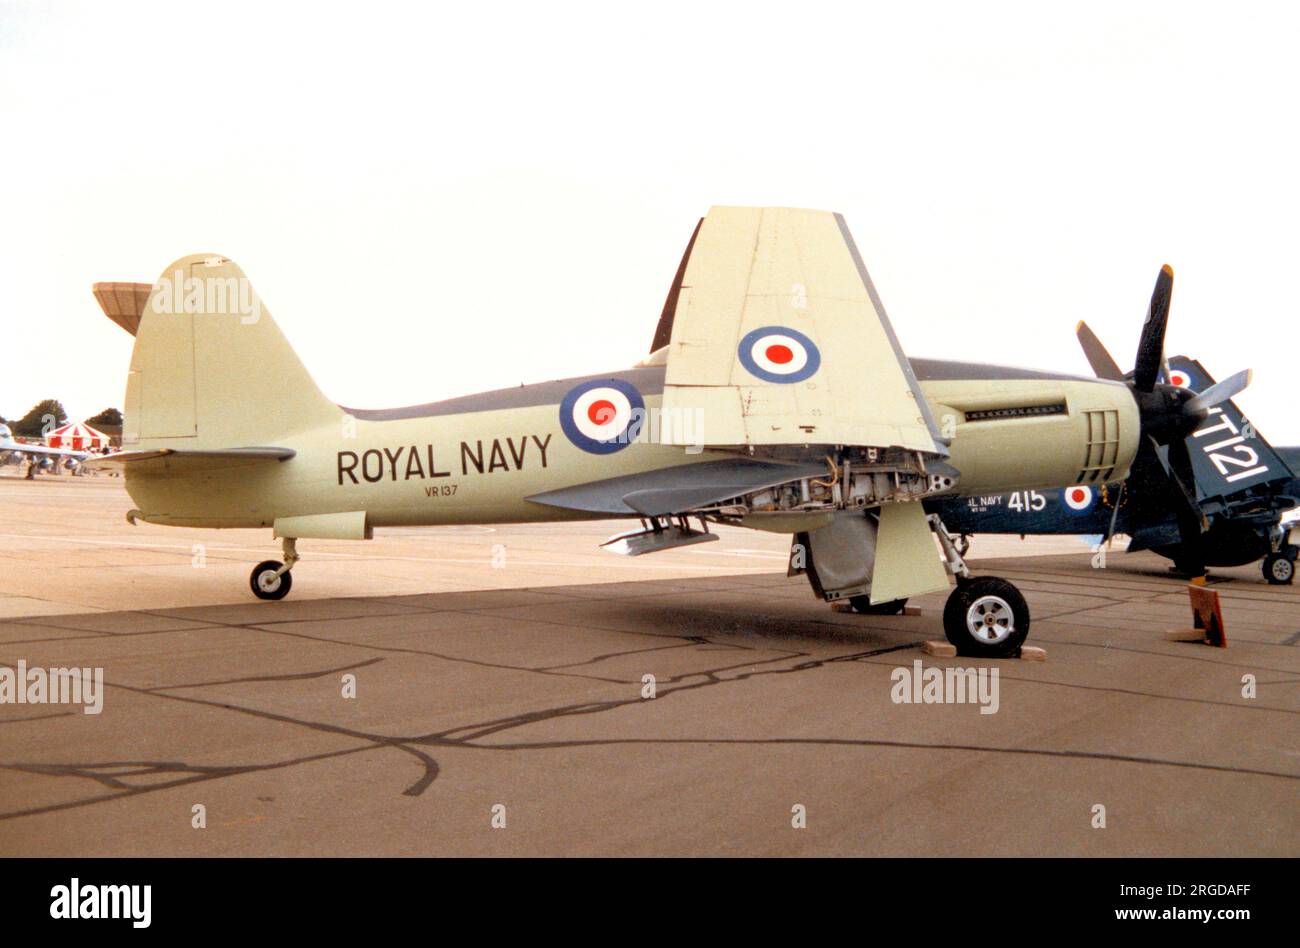 Westland W.34 Wyvern TF.1 VR137, the seventh pre-production aircraft which was allocated to ground-based trials and never flew. Seen on display at RNAS Yeovilton, where it resides in the Fleet Air Arm Museum. Stock Photo